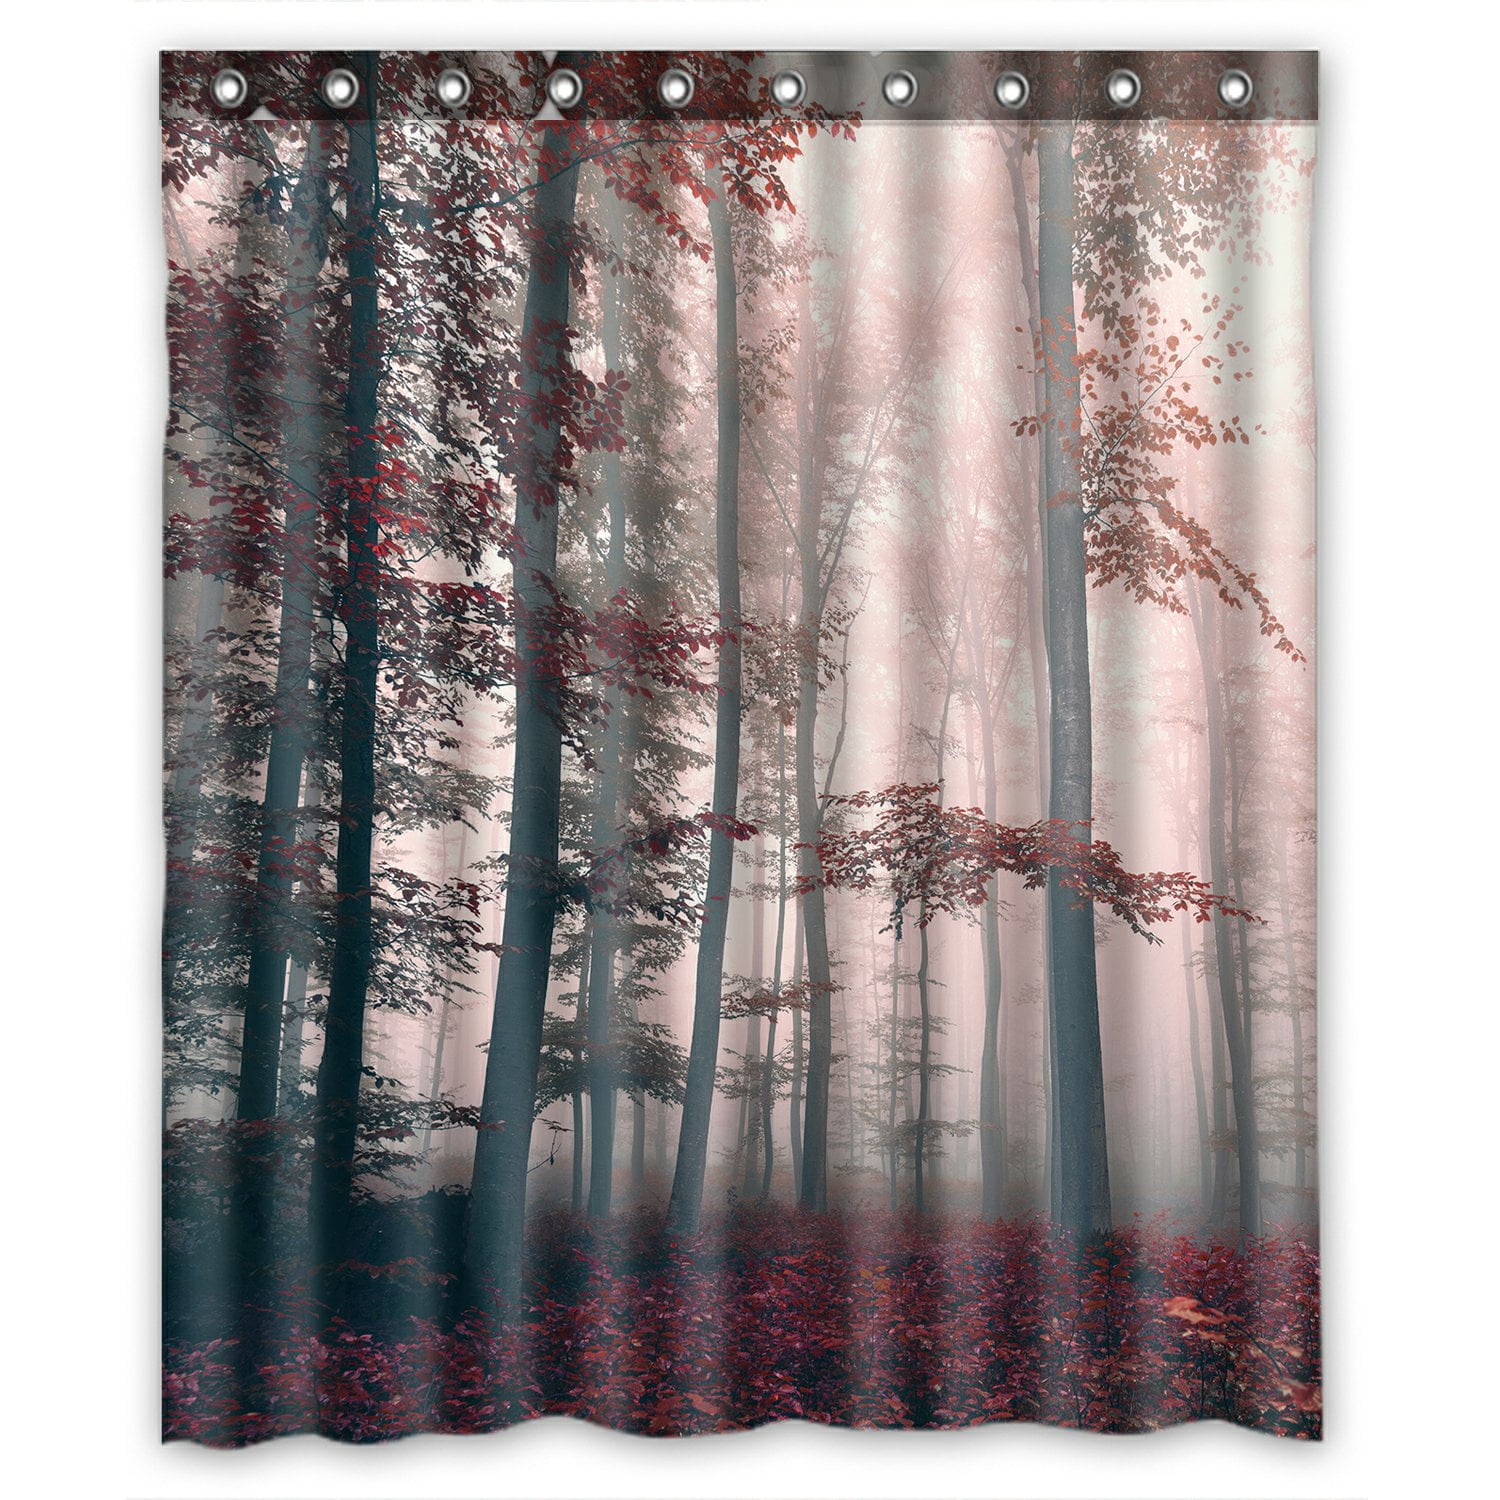 PHFZK Nature Scenery Shower Curtain, Beautiful Red Colored Foggy Mystic ...